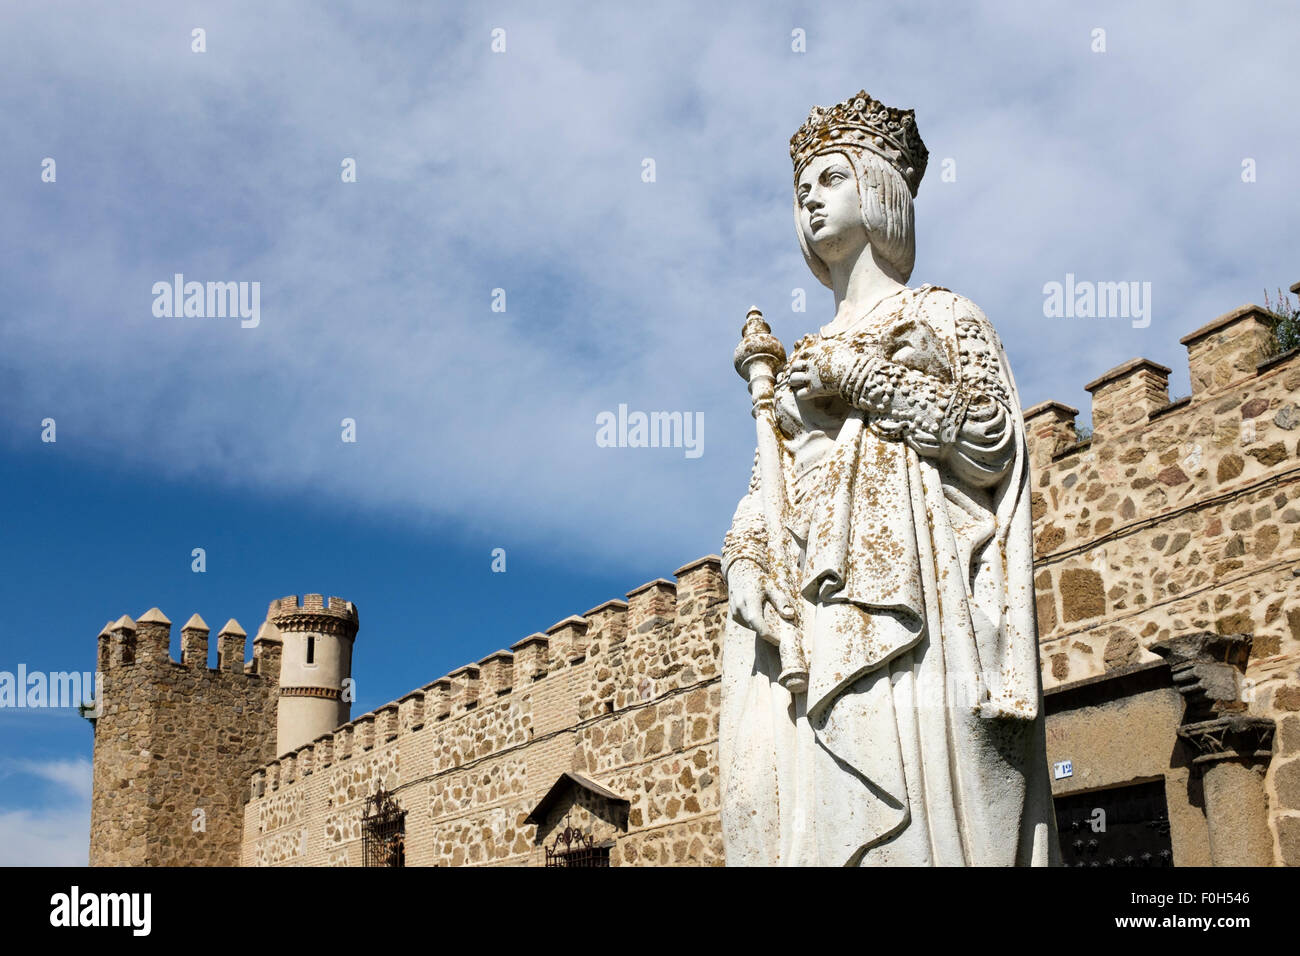 Statue of Queen Isabella I of Spain, near the Monastery of  San Juan de los Reyes, in the Spanish city of Toledo, Spain. Stock Photo